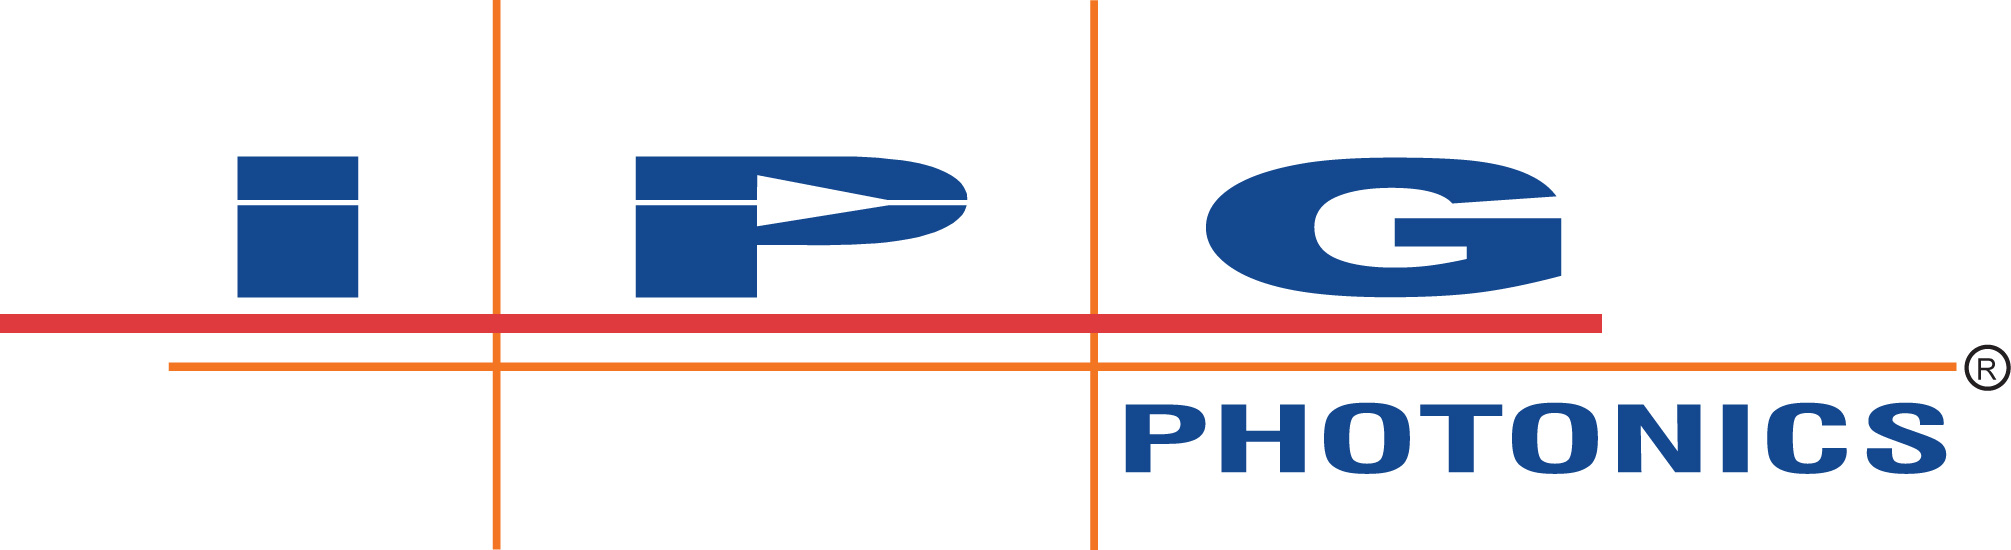 IPG Photonics Announces Addition to its Board of Directors